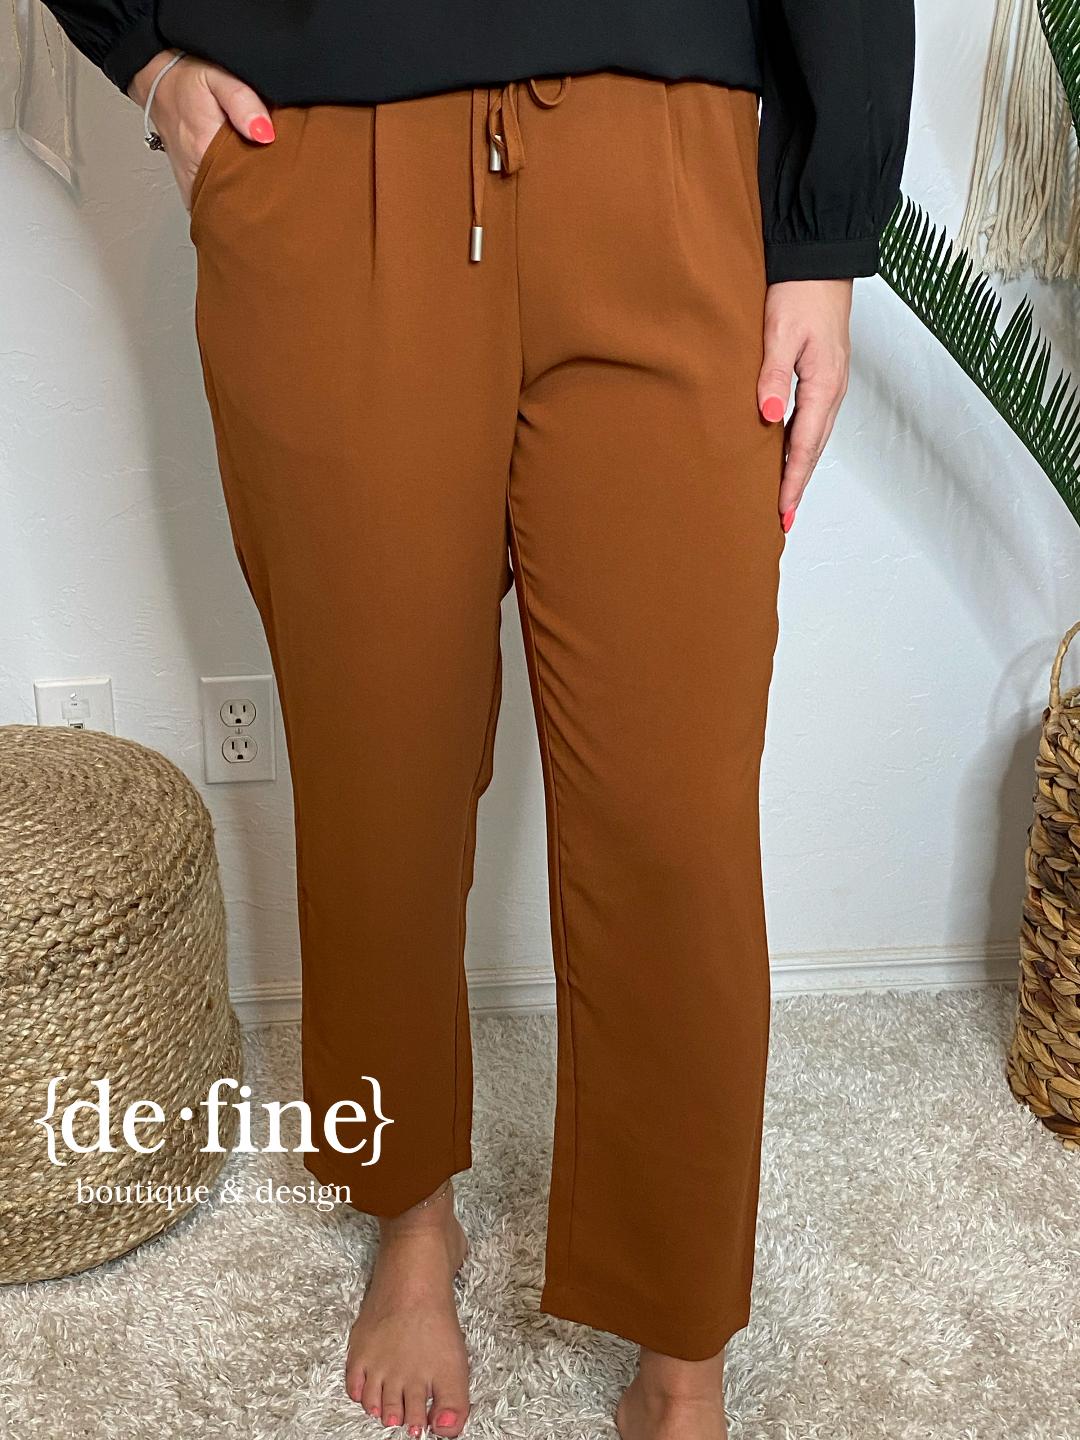 Toffee Colored Pants